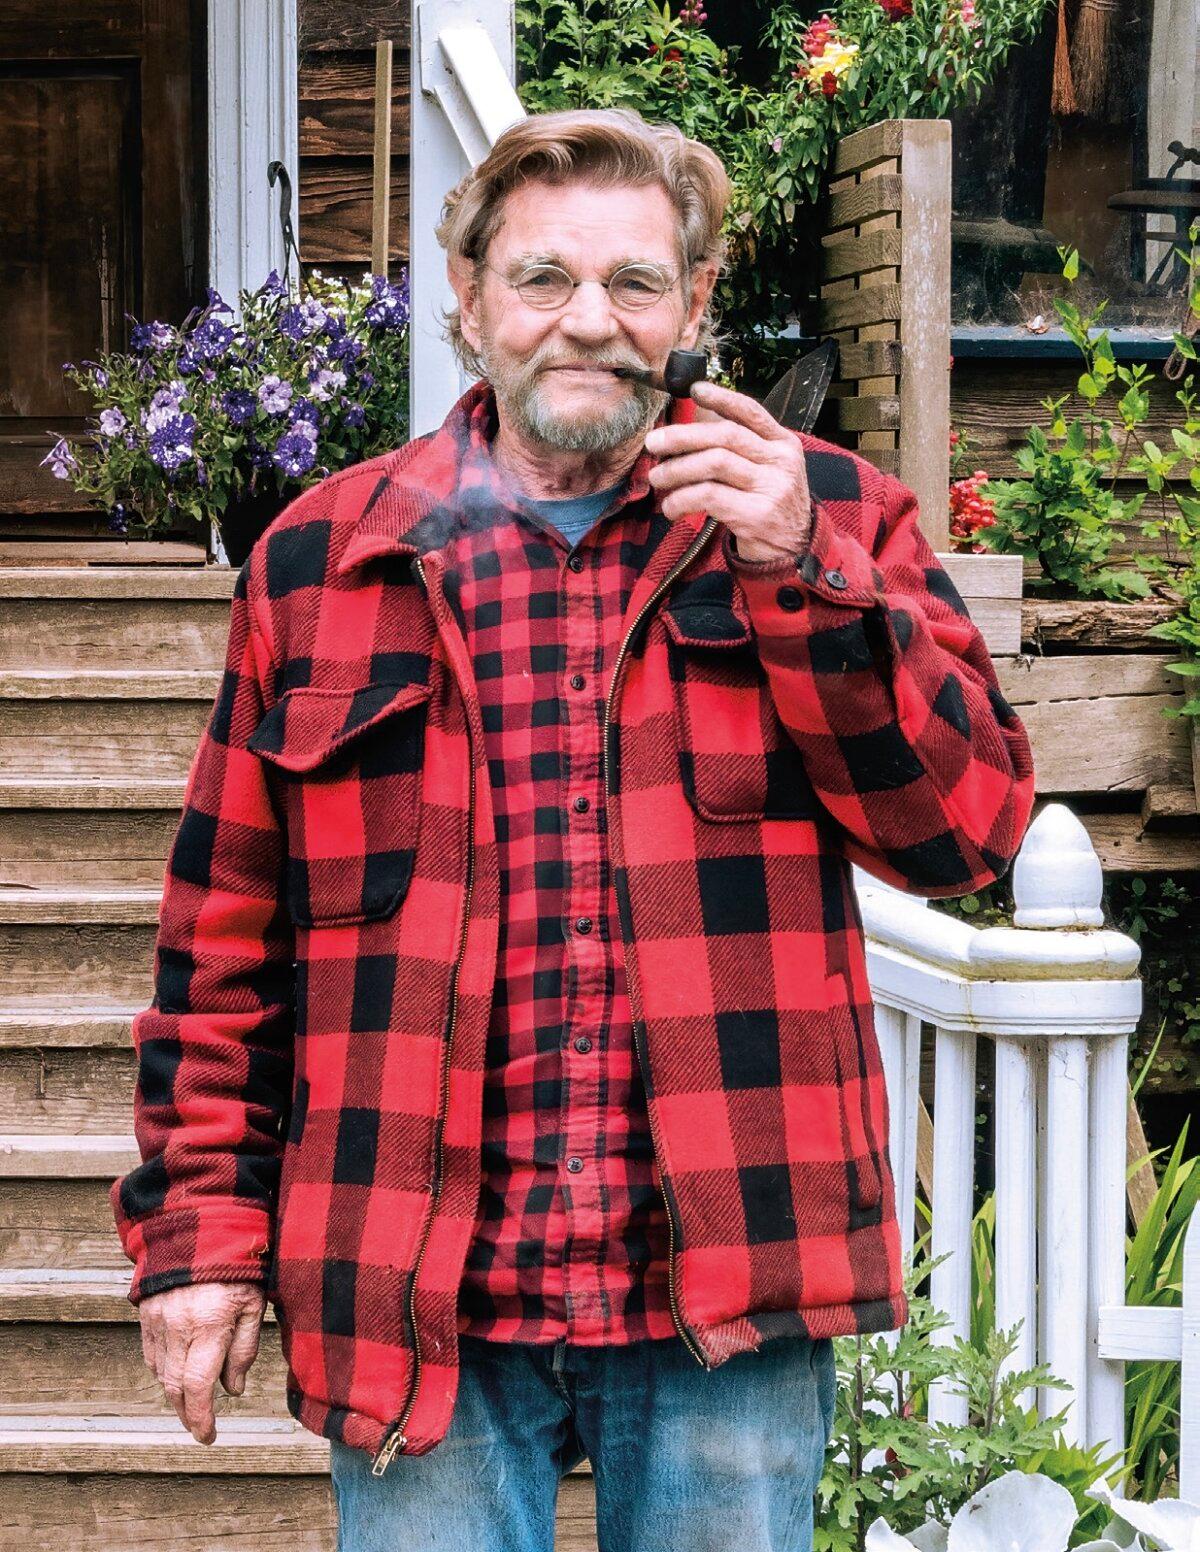 Eric Hollenbeck, in his signature lumberjack shirt, stands in front of the Blue Ox Millworks office in Eureka, Calif. (Maria Coulson)